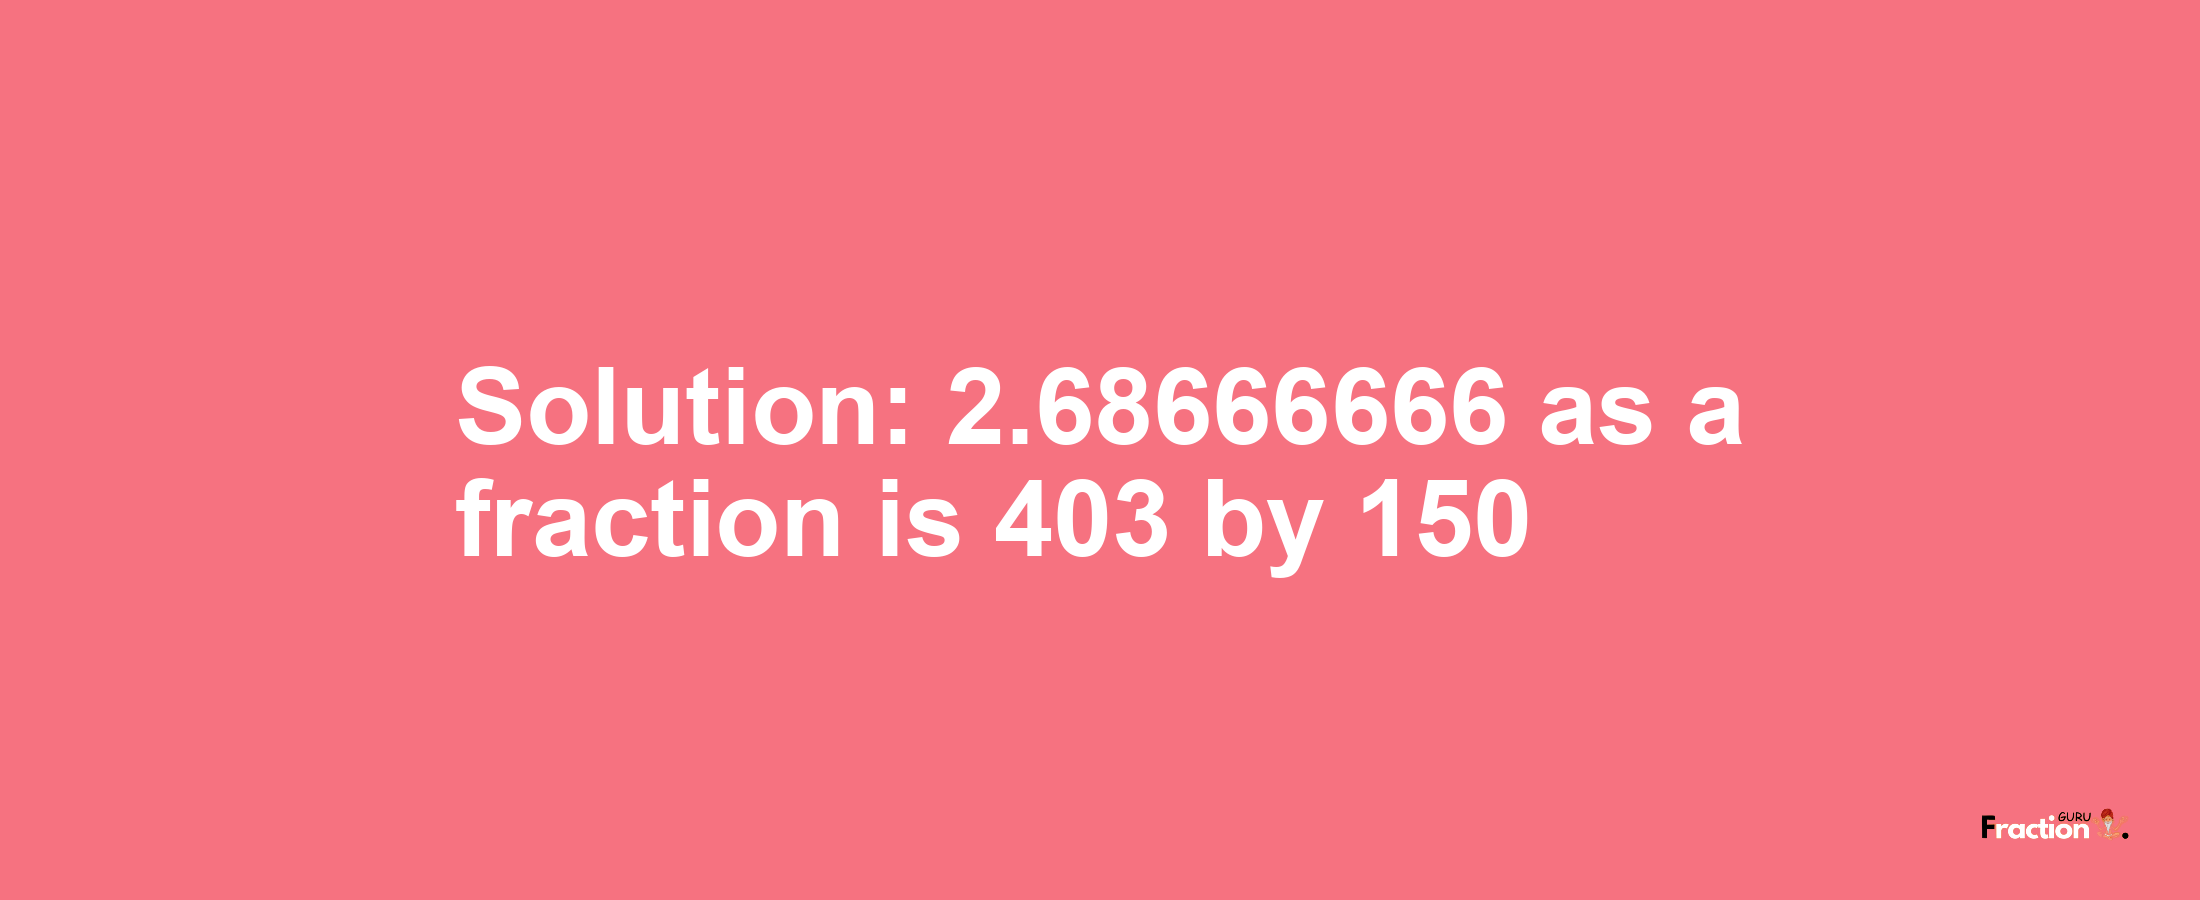 Solution:2.68666666 as a fraction is 403/150